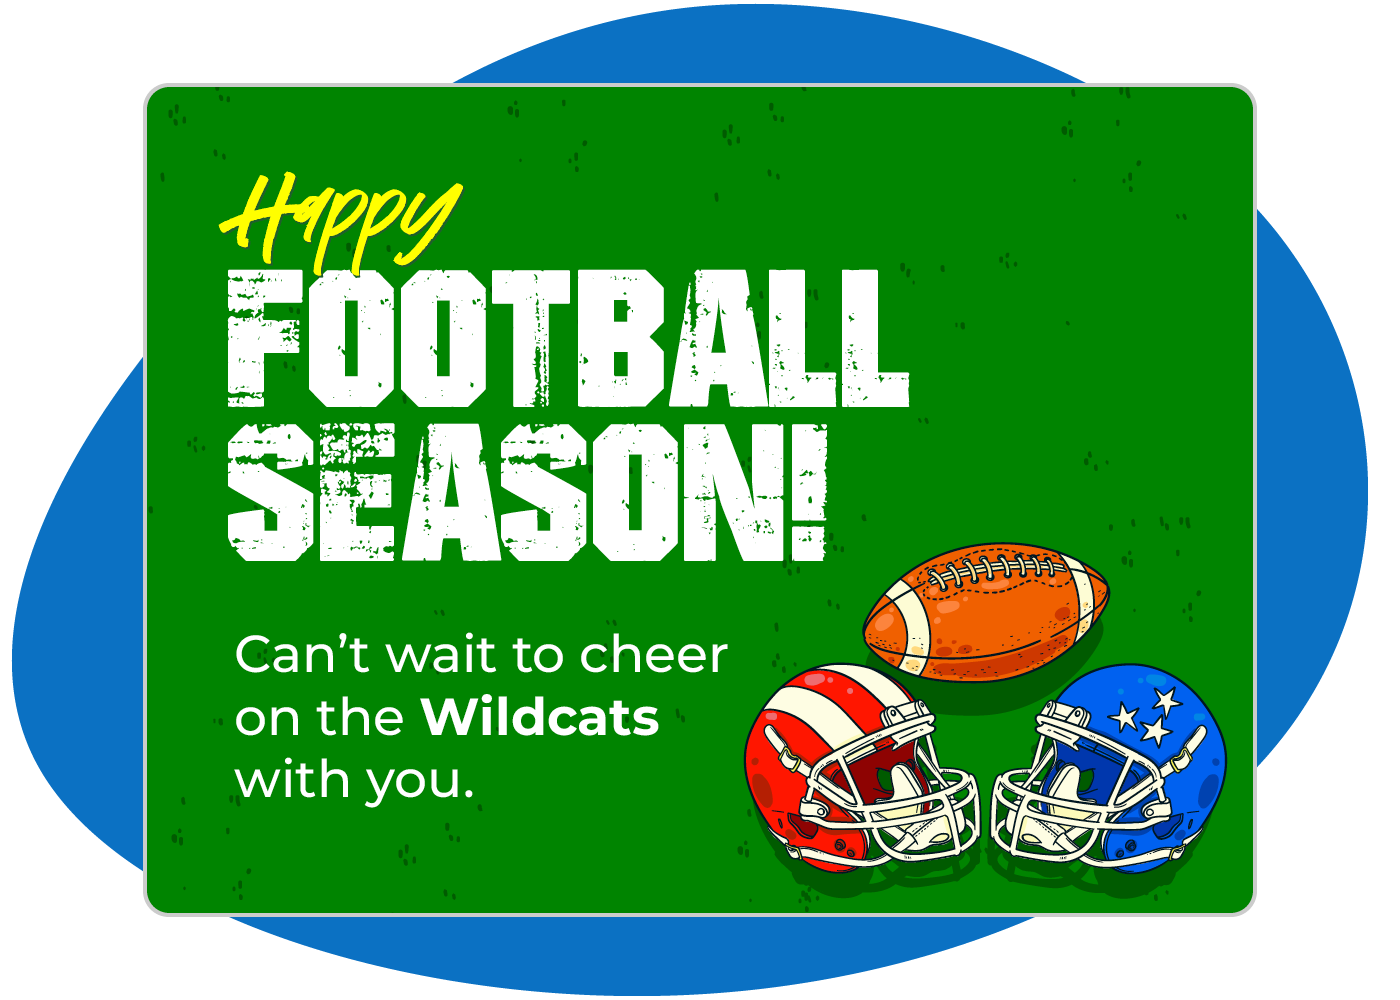 An example eCard you could offer donors as part of an eCard football fundraiser